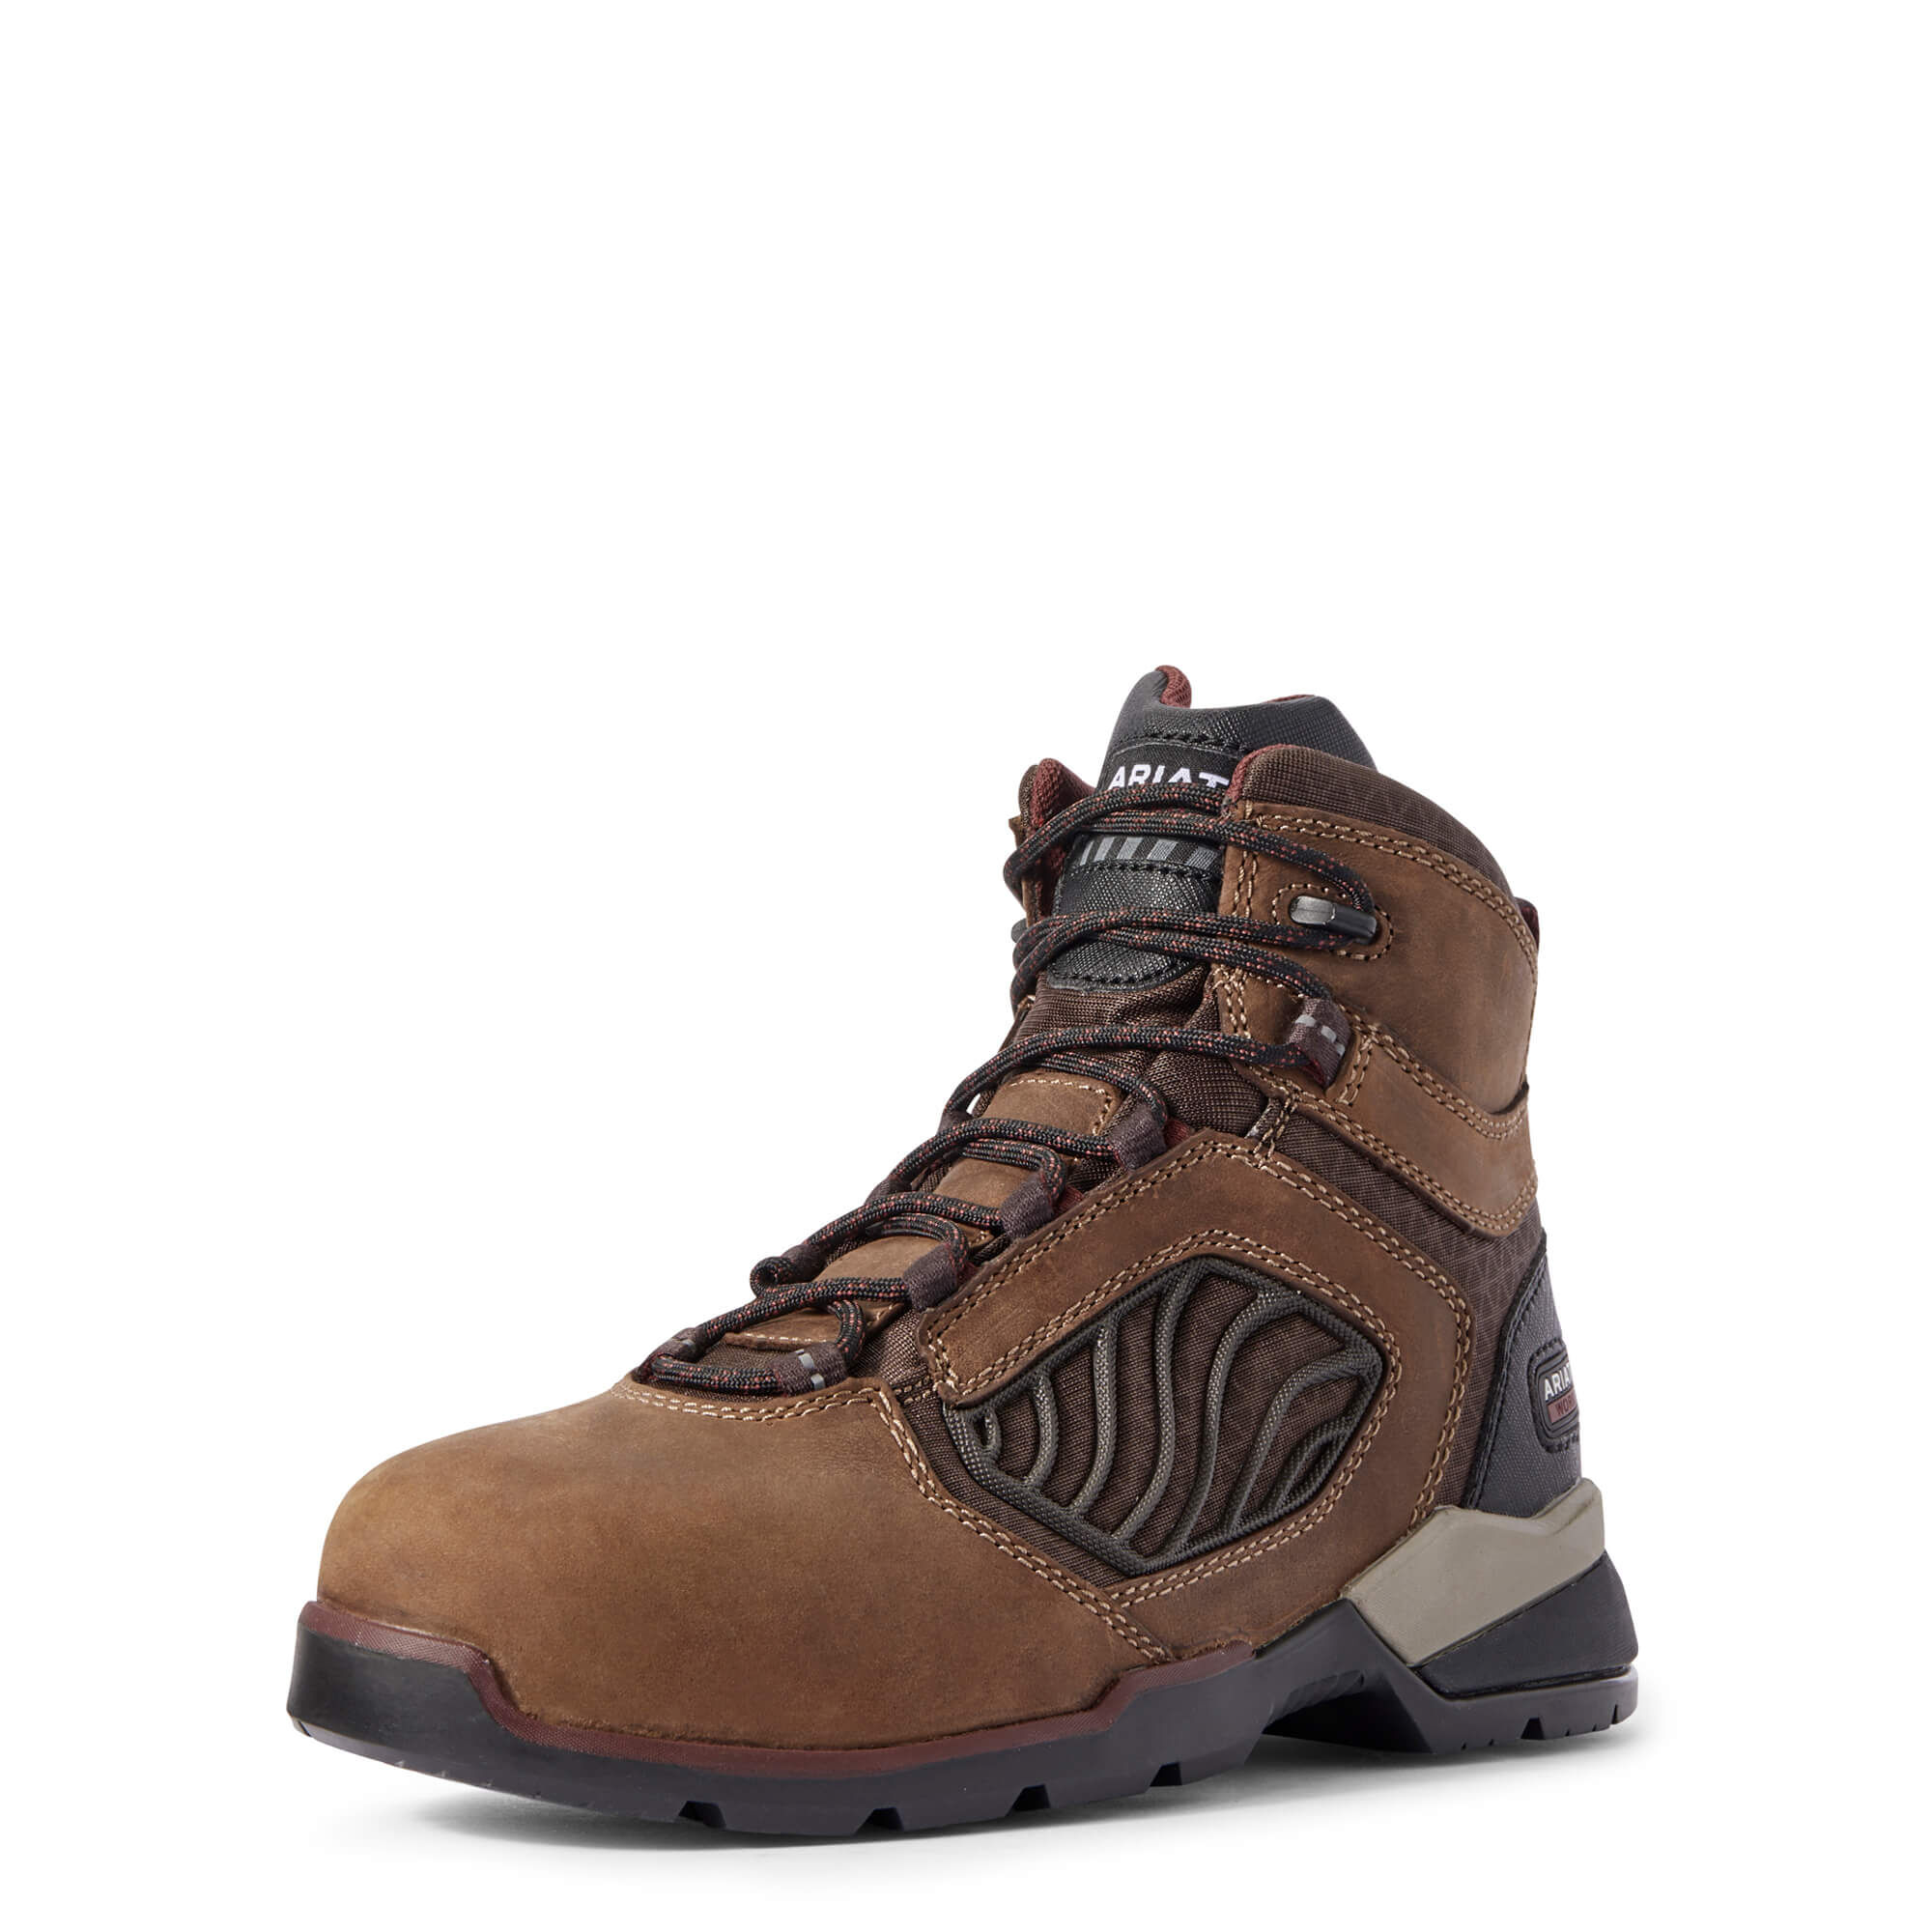 Women's Rebar Flex 6 inch Carbon Toe Work Boots in Autumn Tan Leather  by Ariat